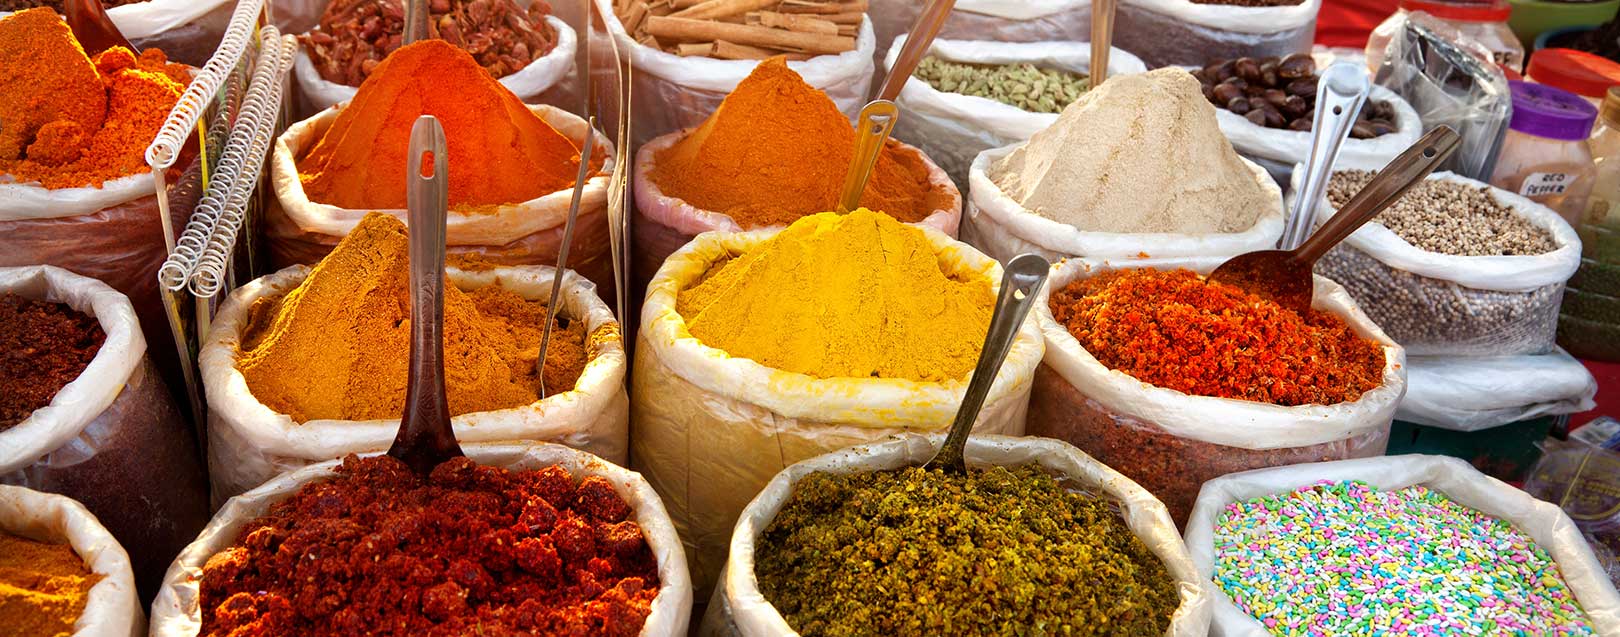 Spices exports grew 5% in volume terms during Apr-Dec 2016-17